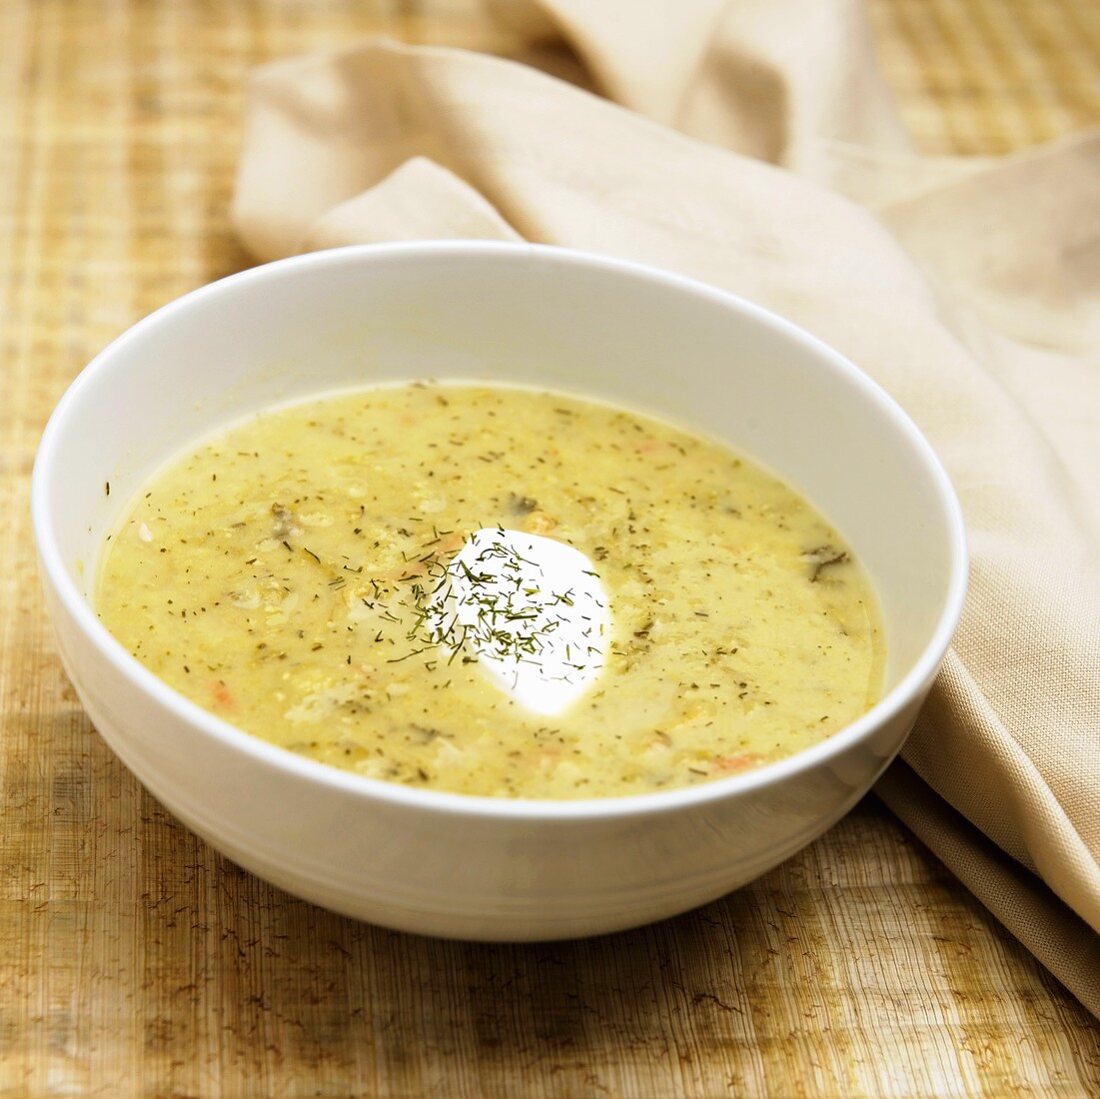 Bowl of Asparagus Soup with Sour Cream and Dill